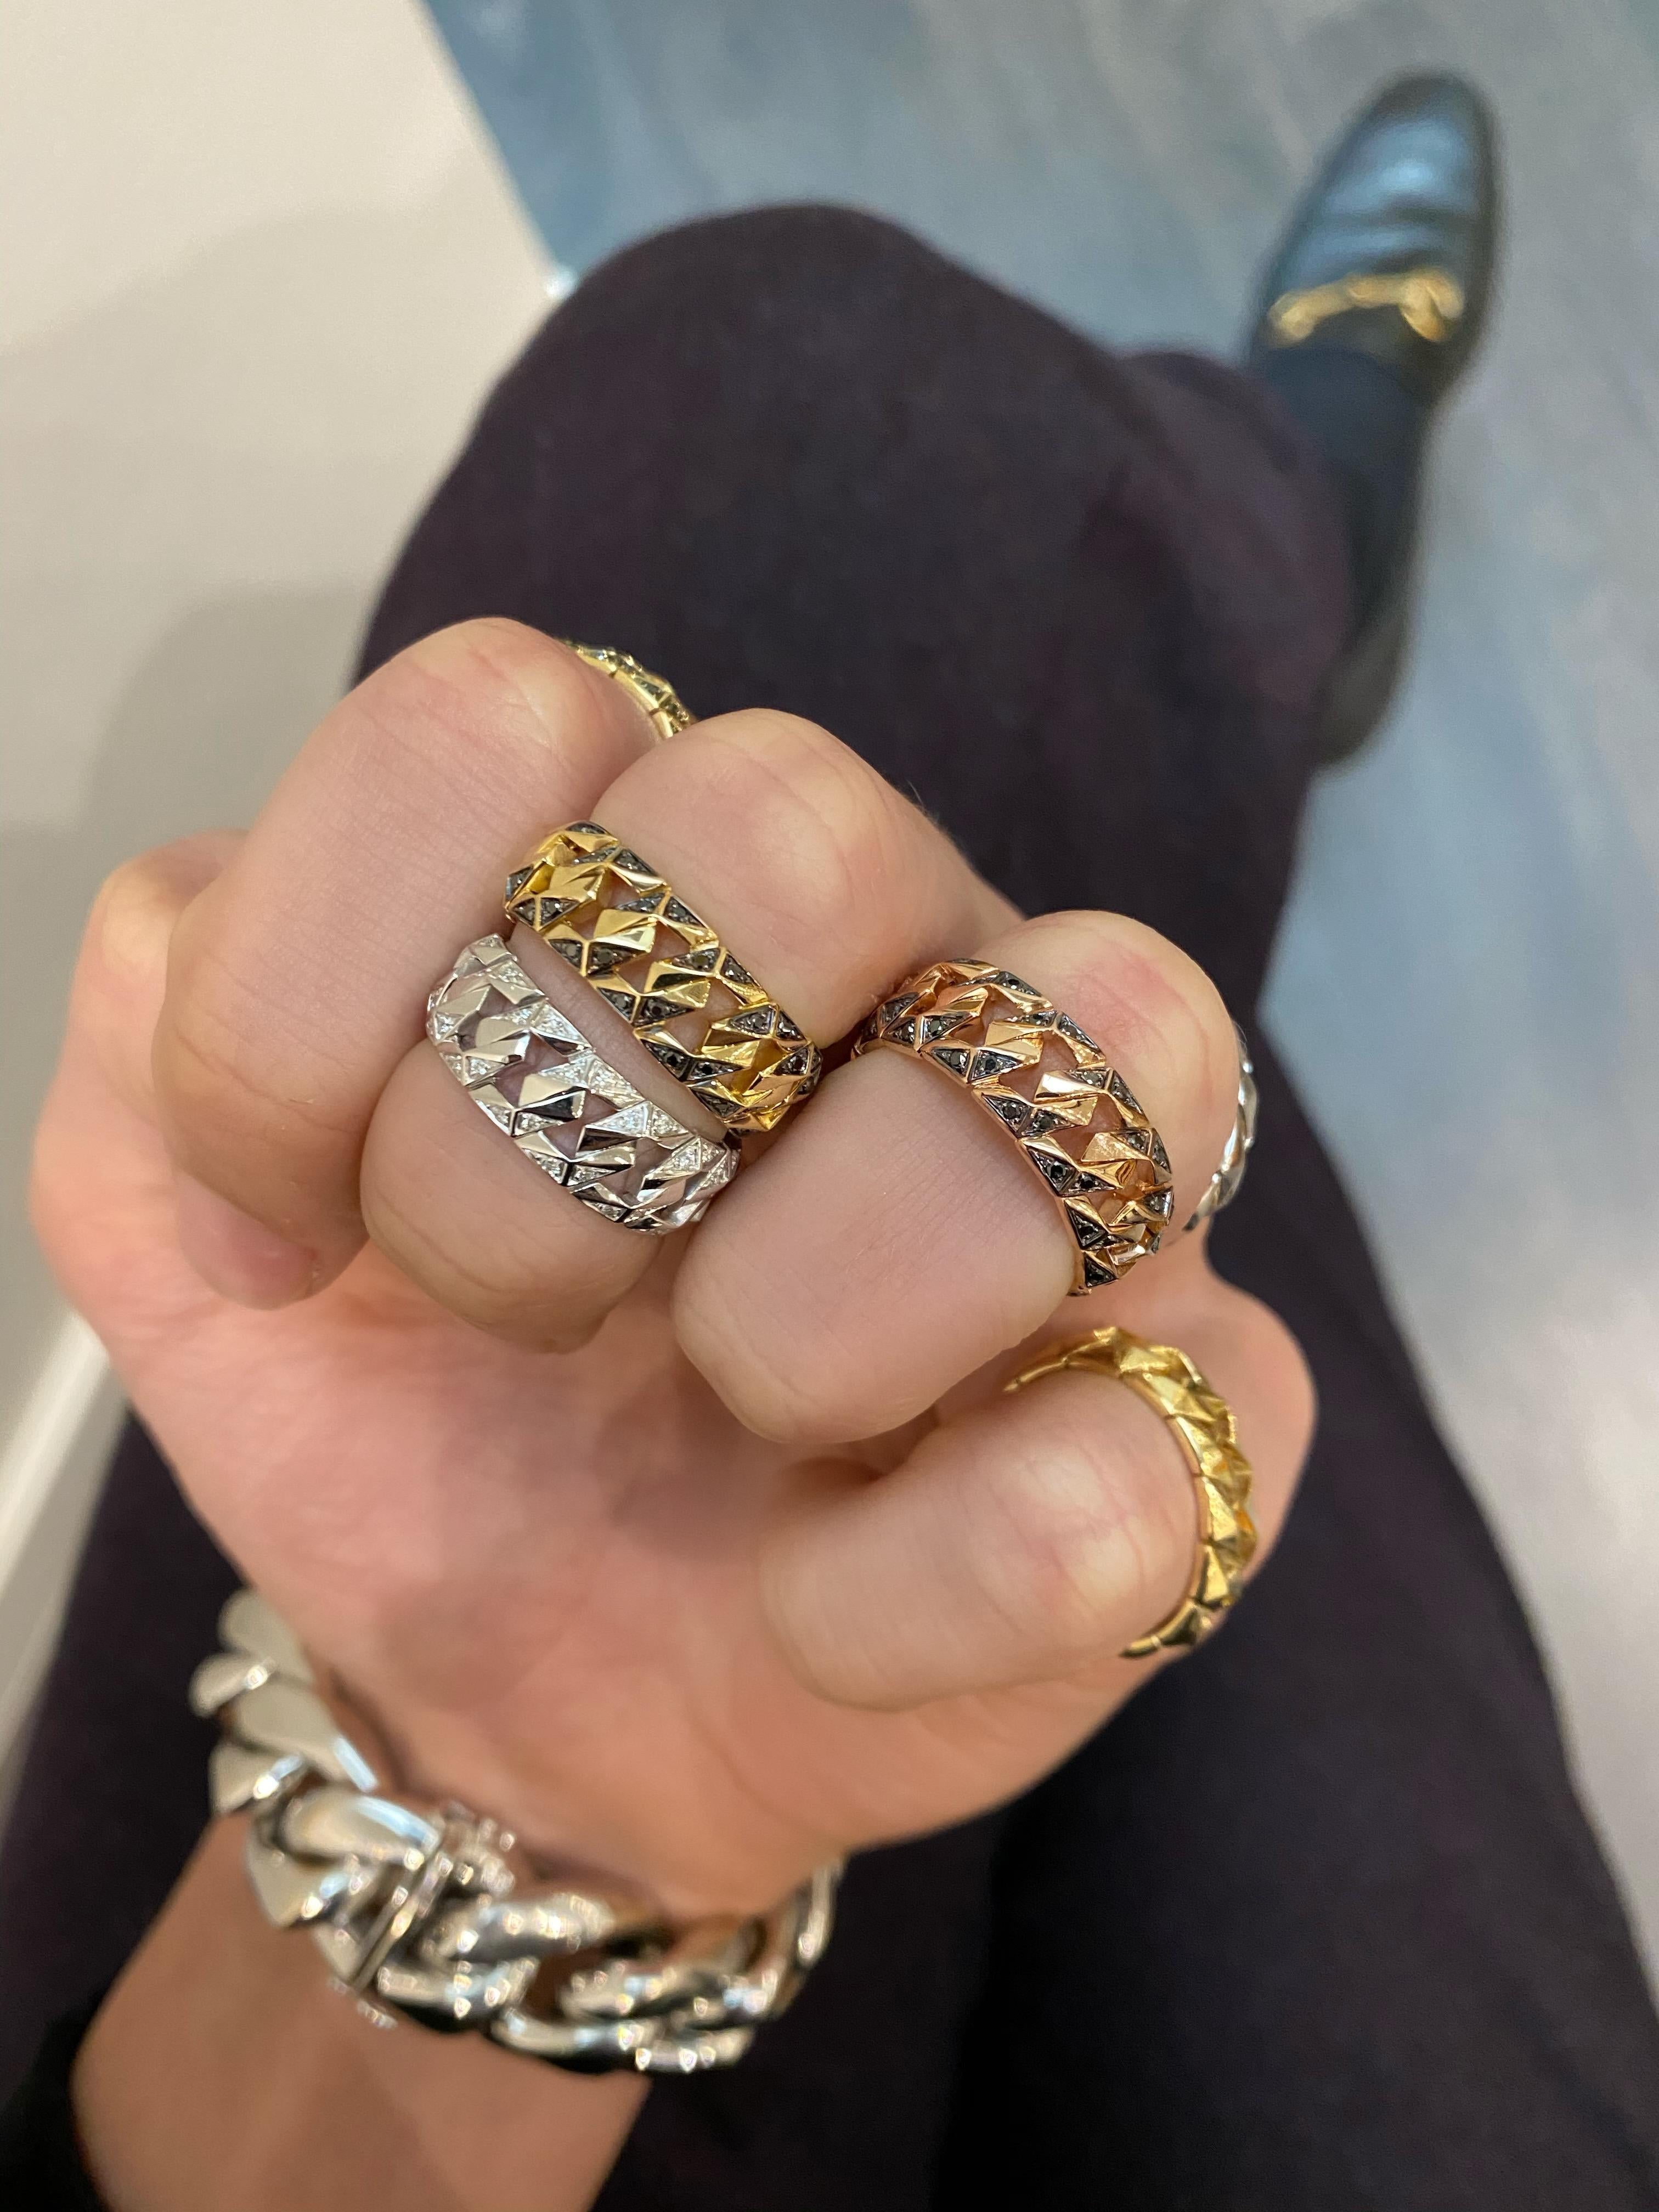 A collection inspired by control, individuality and power.
“If you are ruled by mind you are a king; If by body, a slave”
Rings, handmade in Antwerp, using 18kt pink gold. This ring does not have a regular size. We recommend to select your usual